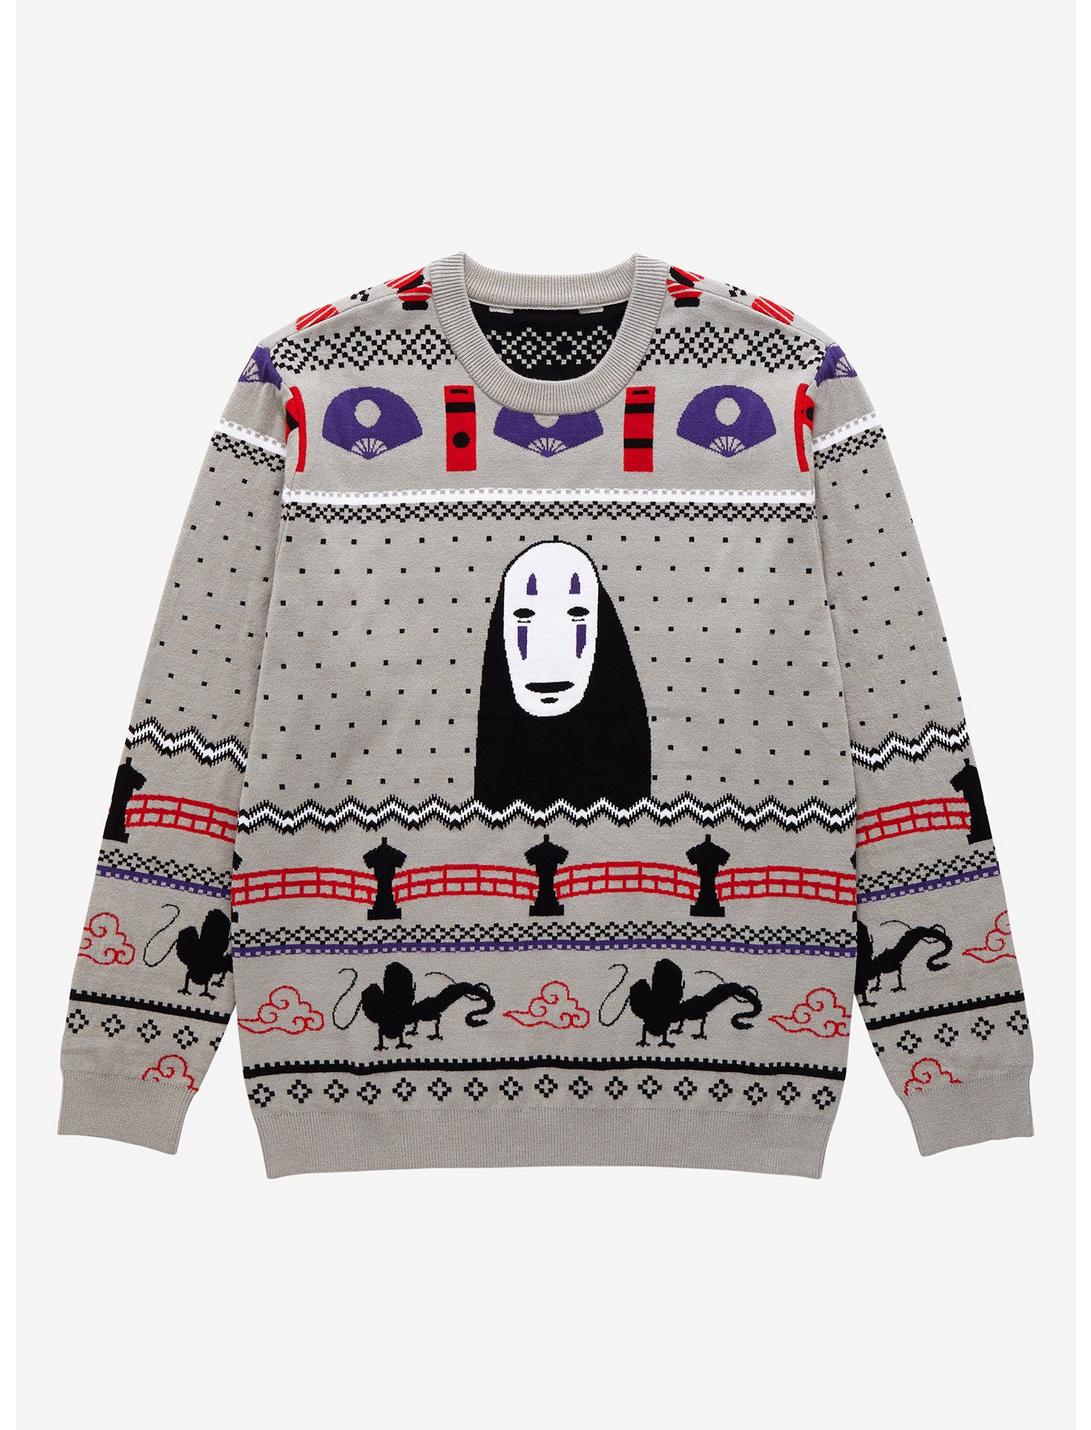 Our Universe Studio Ghibli Spirited Away No-Face Holiday Sweater, MULTI, hi-res